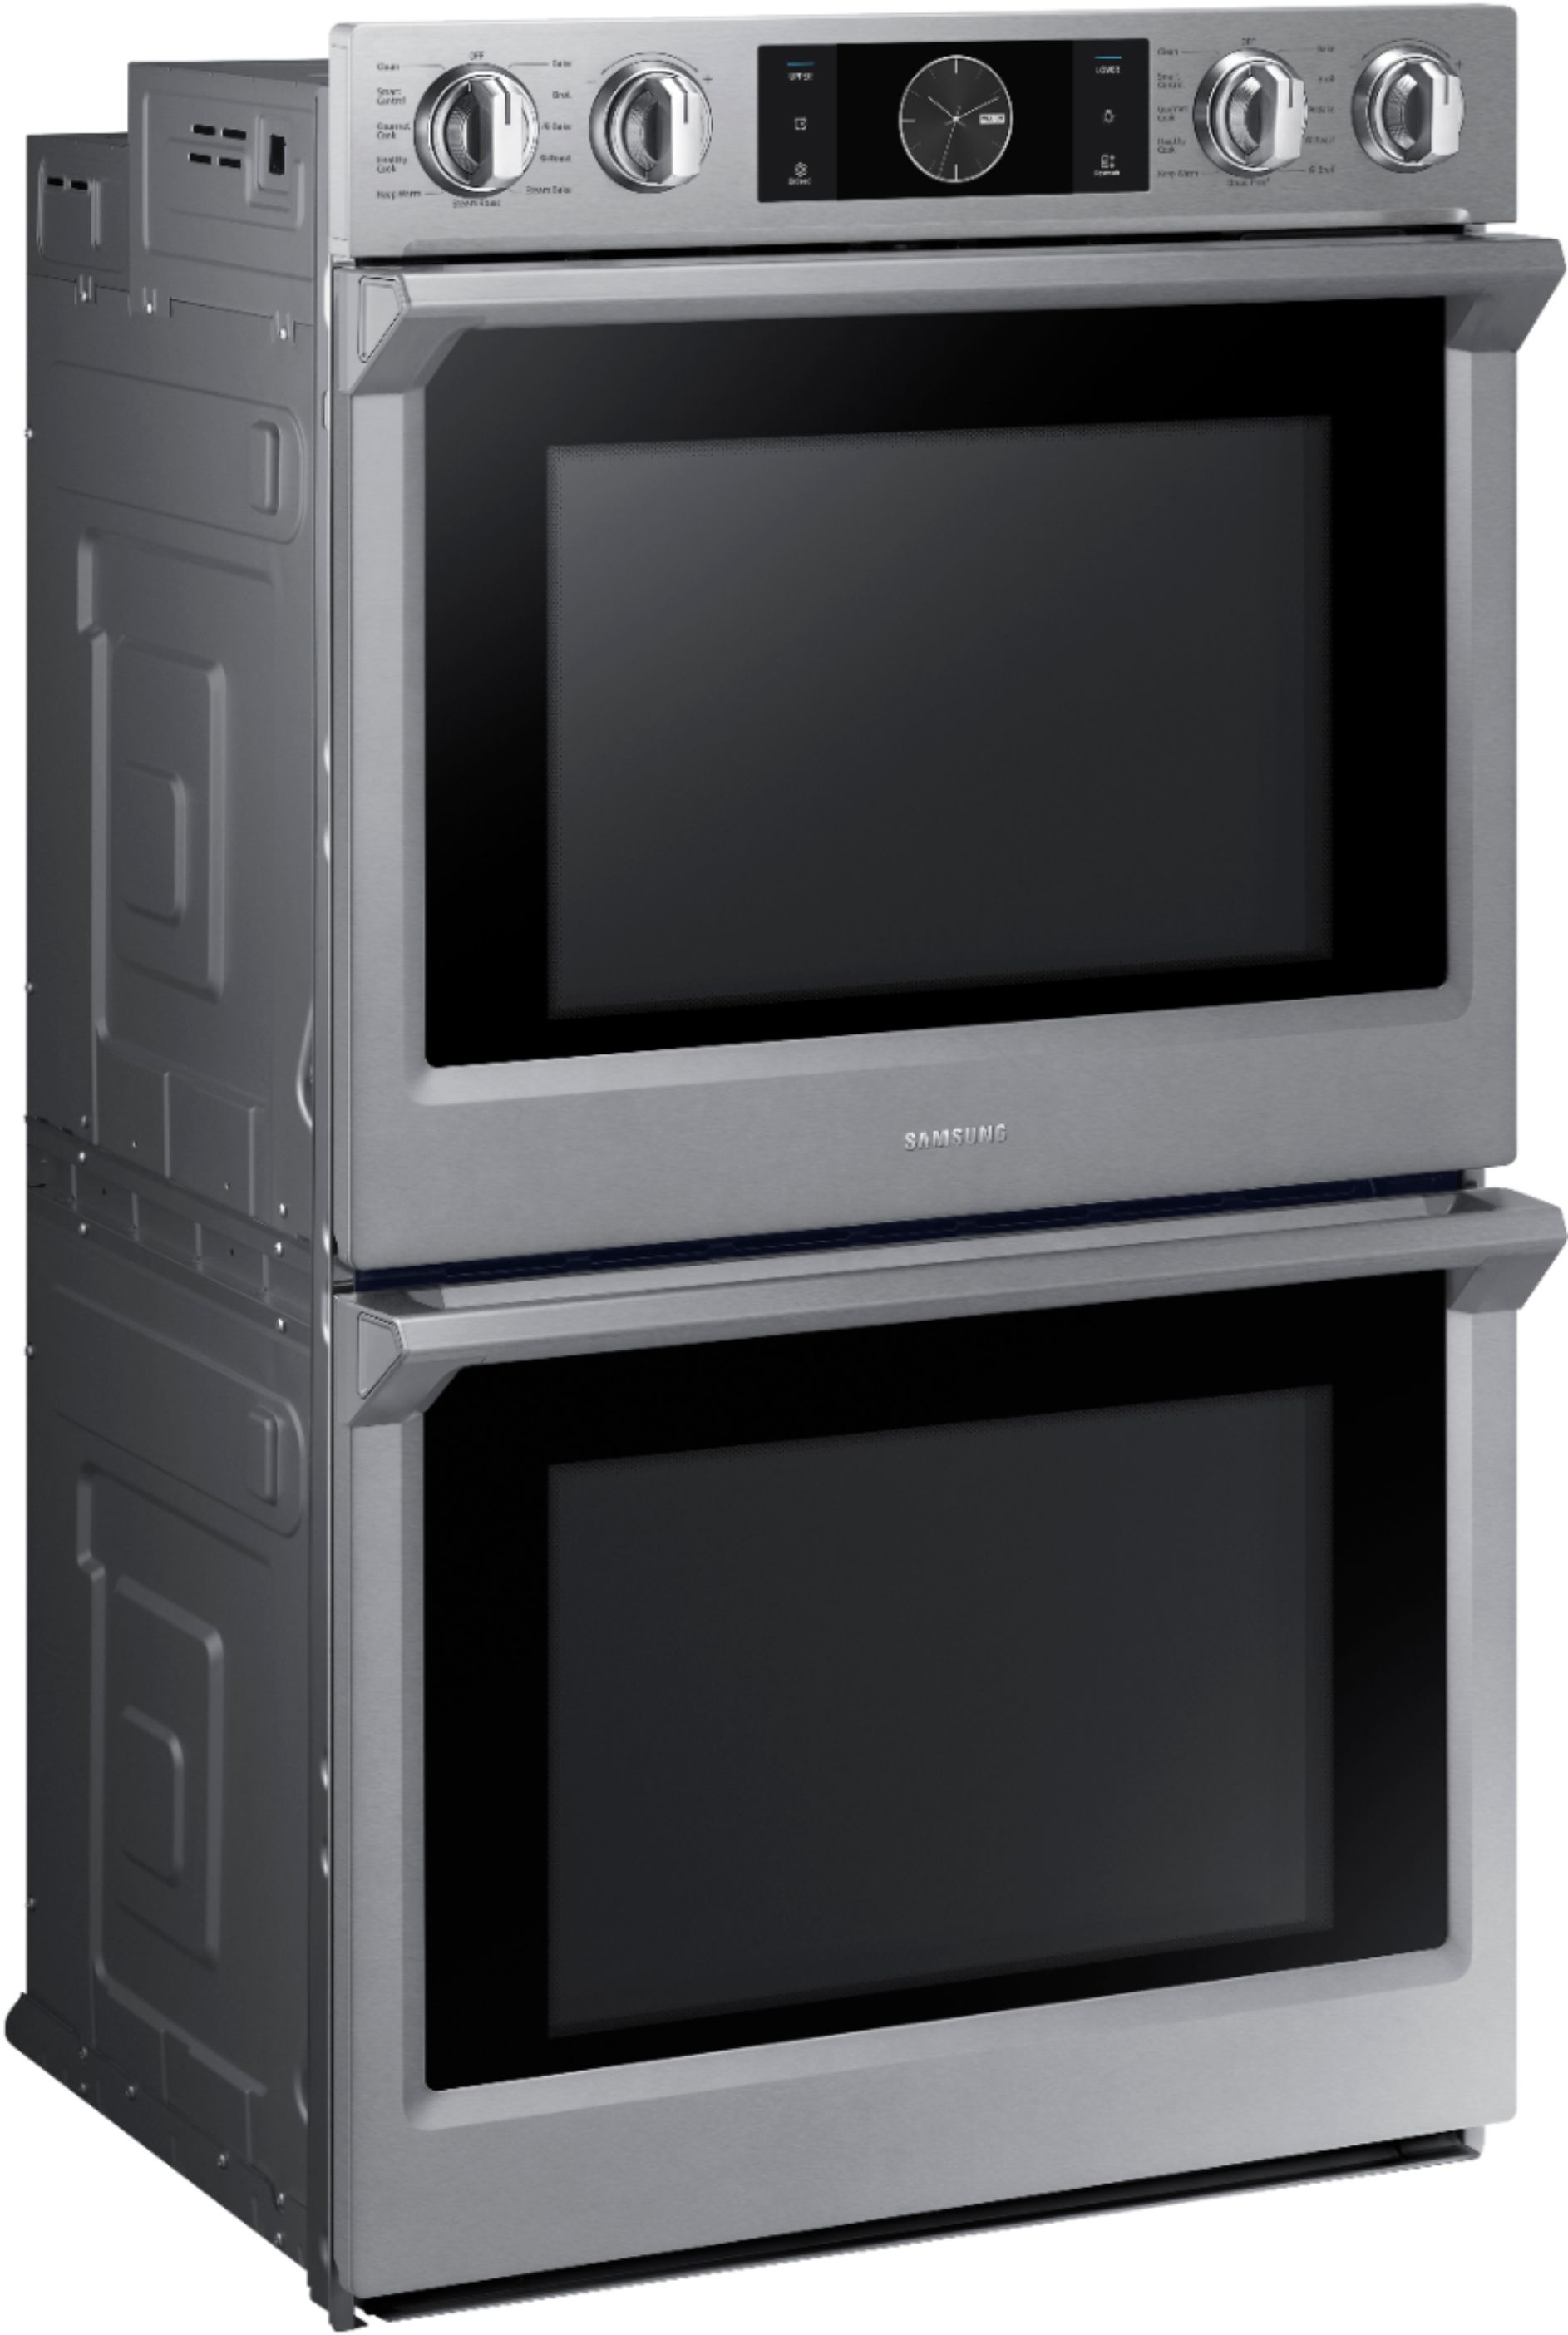 Angle View: Samsung - 30" Double Wall Oven with Flex Duo, Steam Cook and WiFi - Stainless Steel